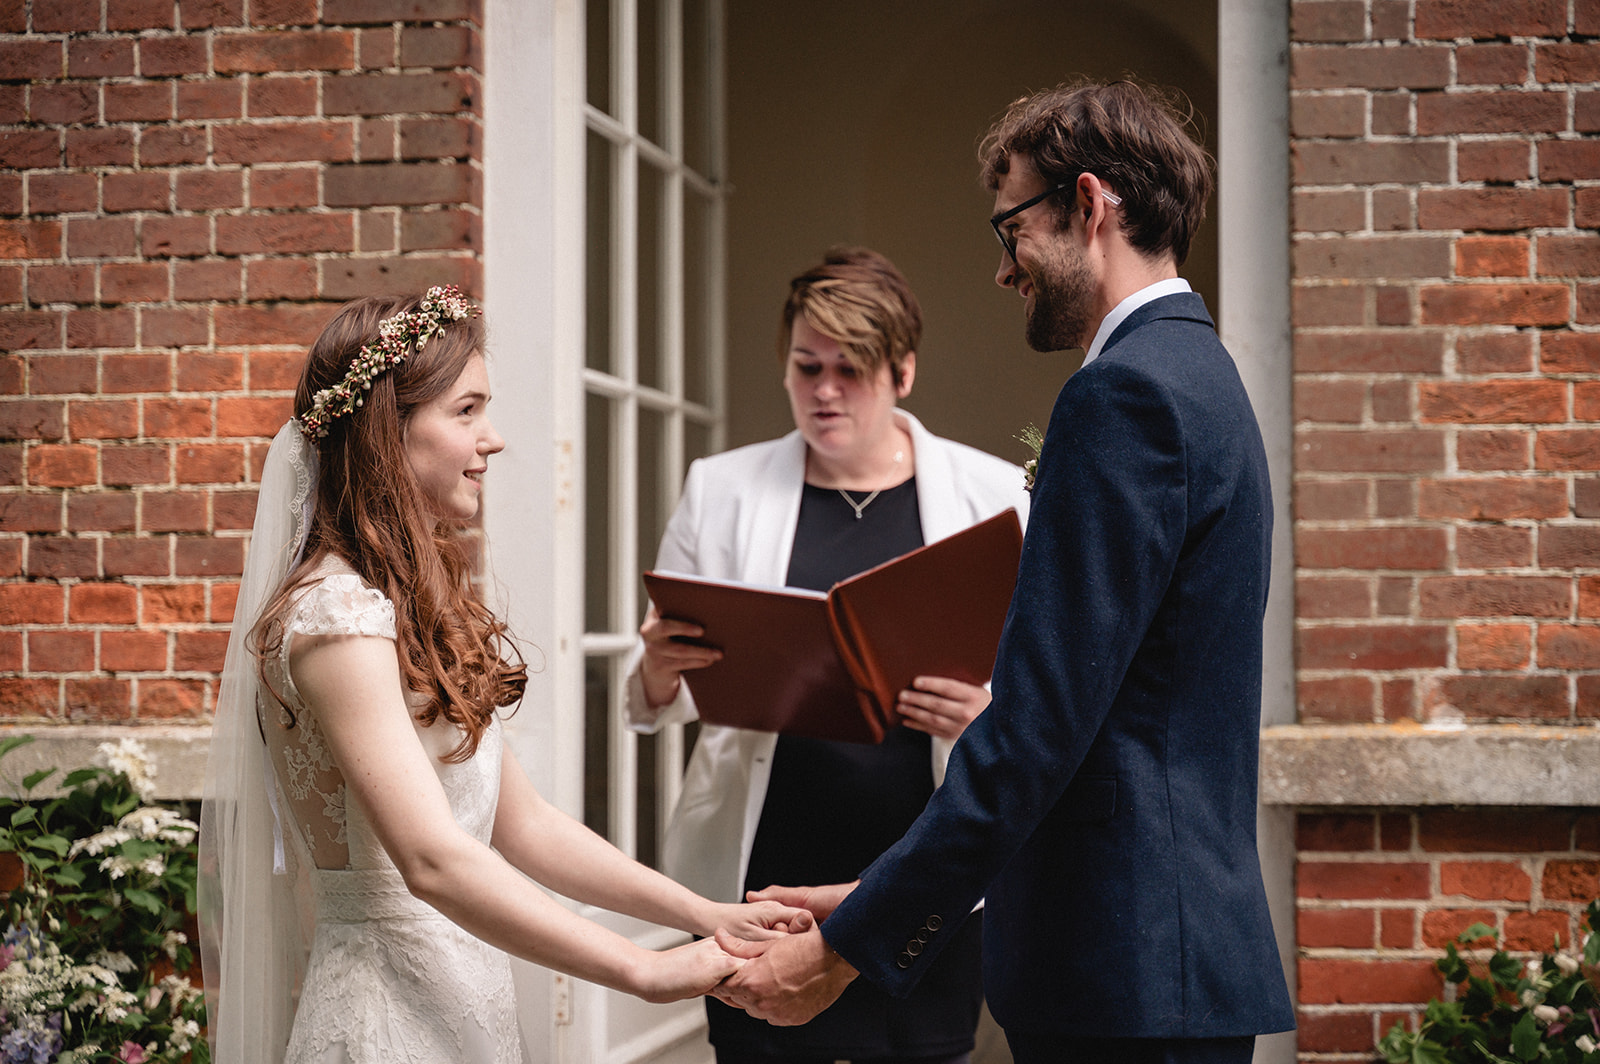 Eleanor and Hartley exchanging vows during the  wedding ceremony at the Organ House at St. Paul's Walden Bury